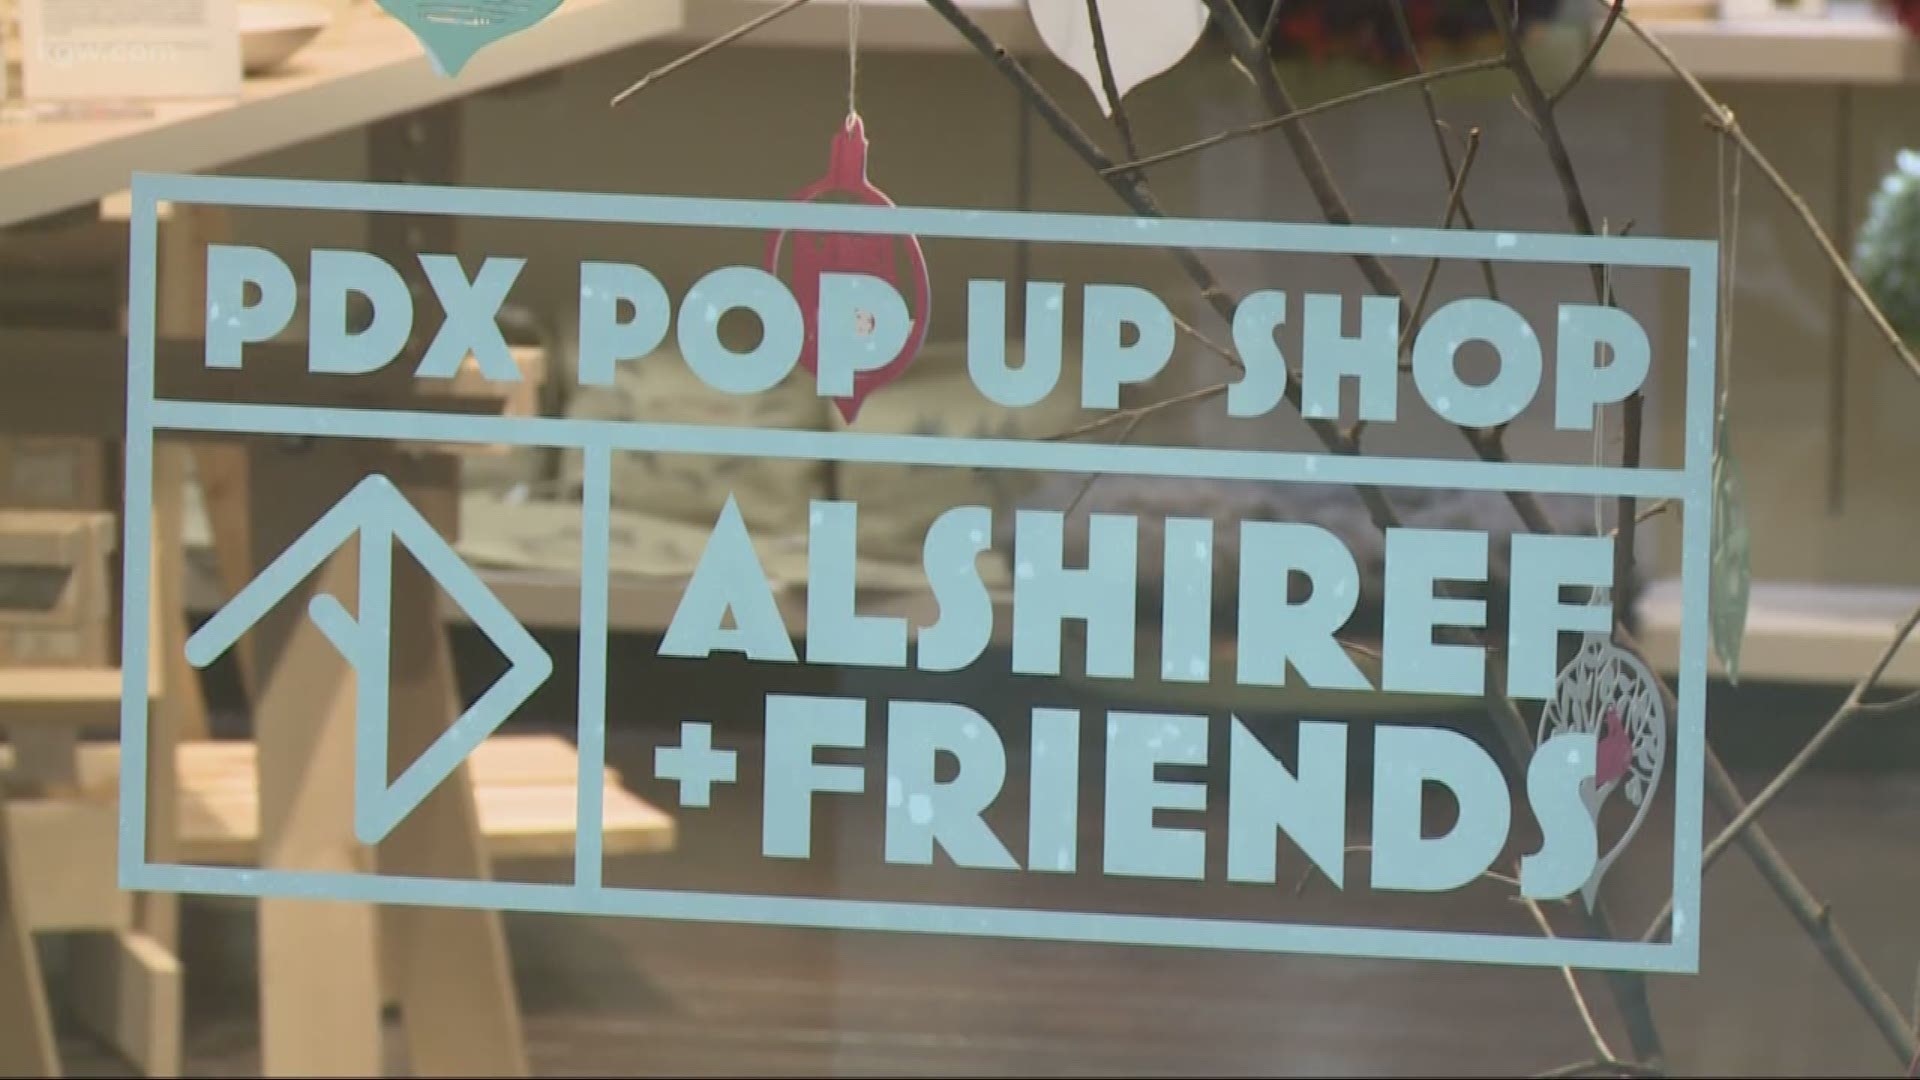 ‘Tis the season for pop up shops! A Holiday pop up shop has moved into the Pioneer Place mall.